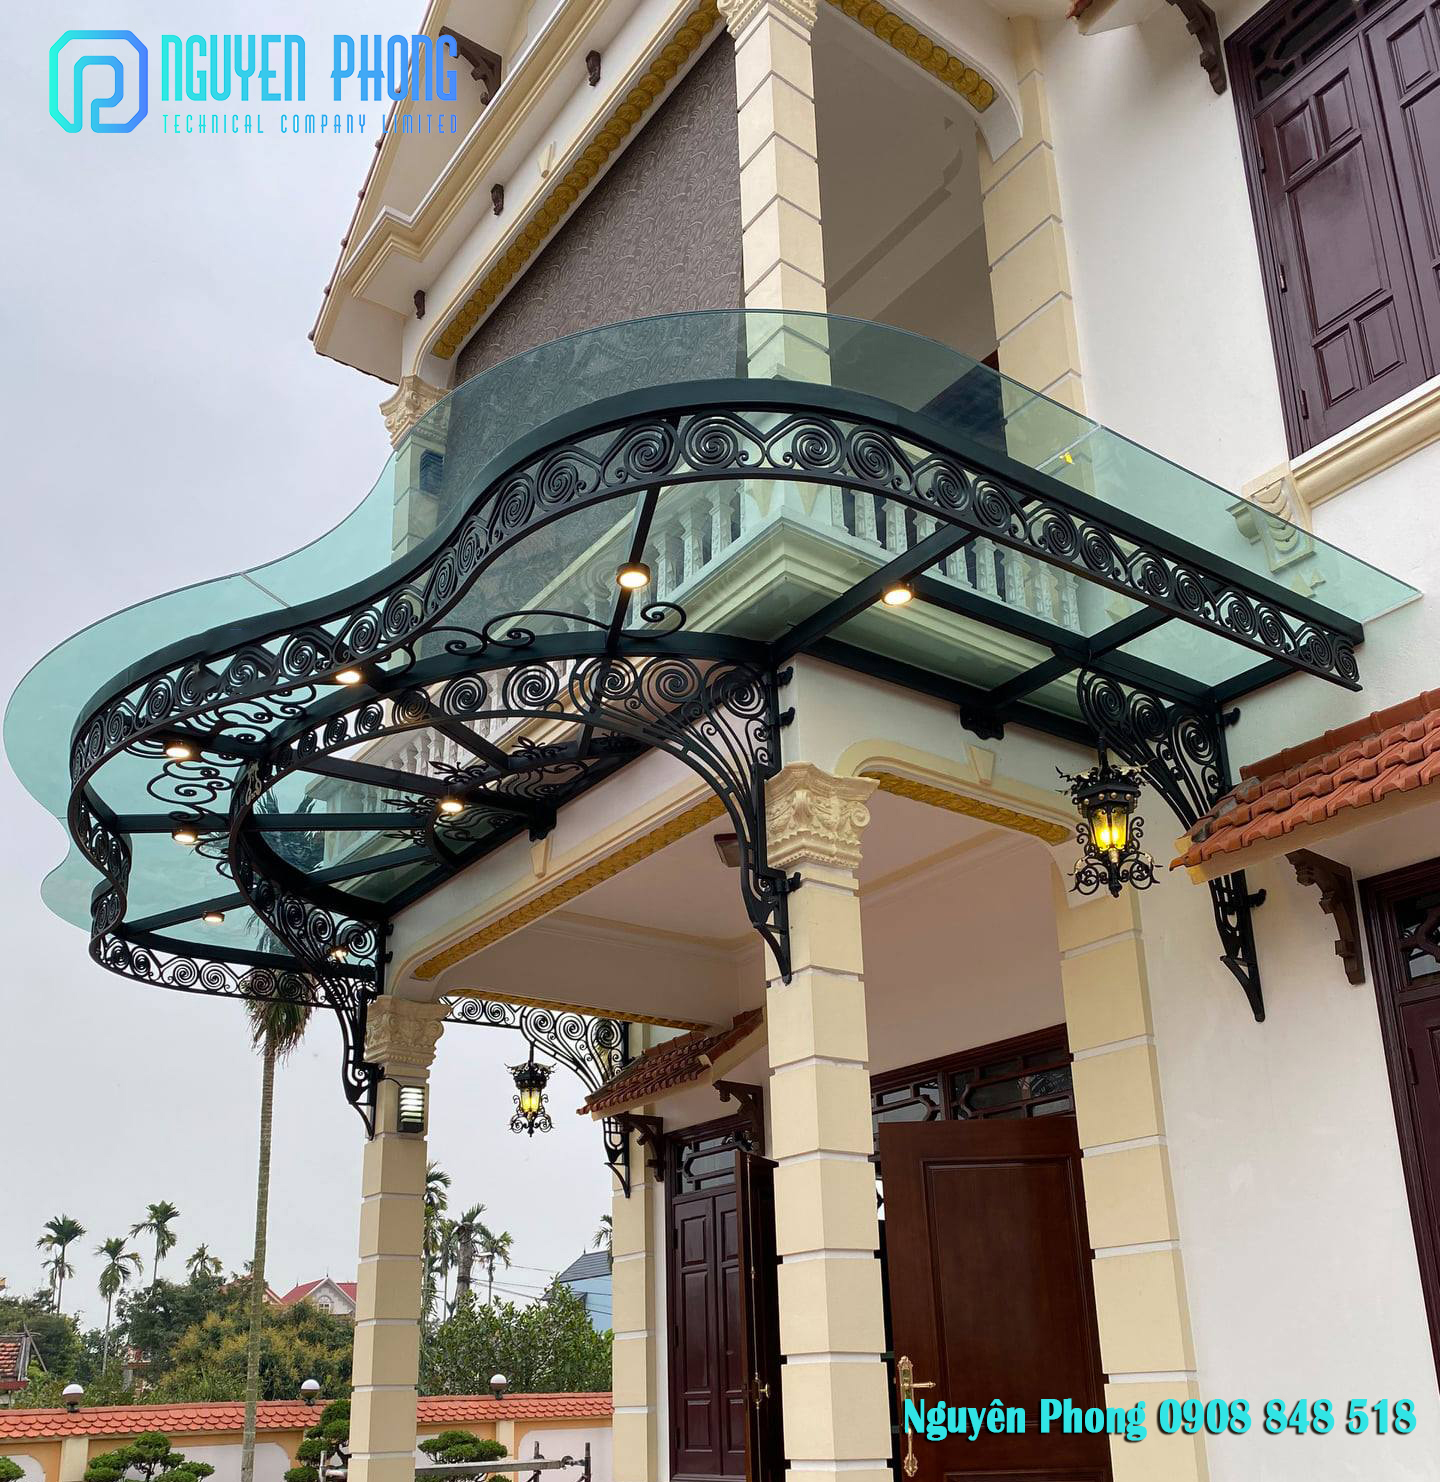 glass-wrought-iron-entry-door-canopy-awning-wrought-iron-canopy-15.jpg